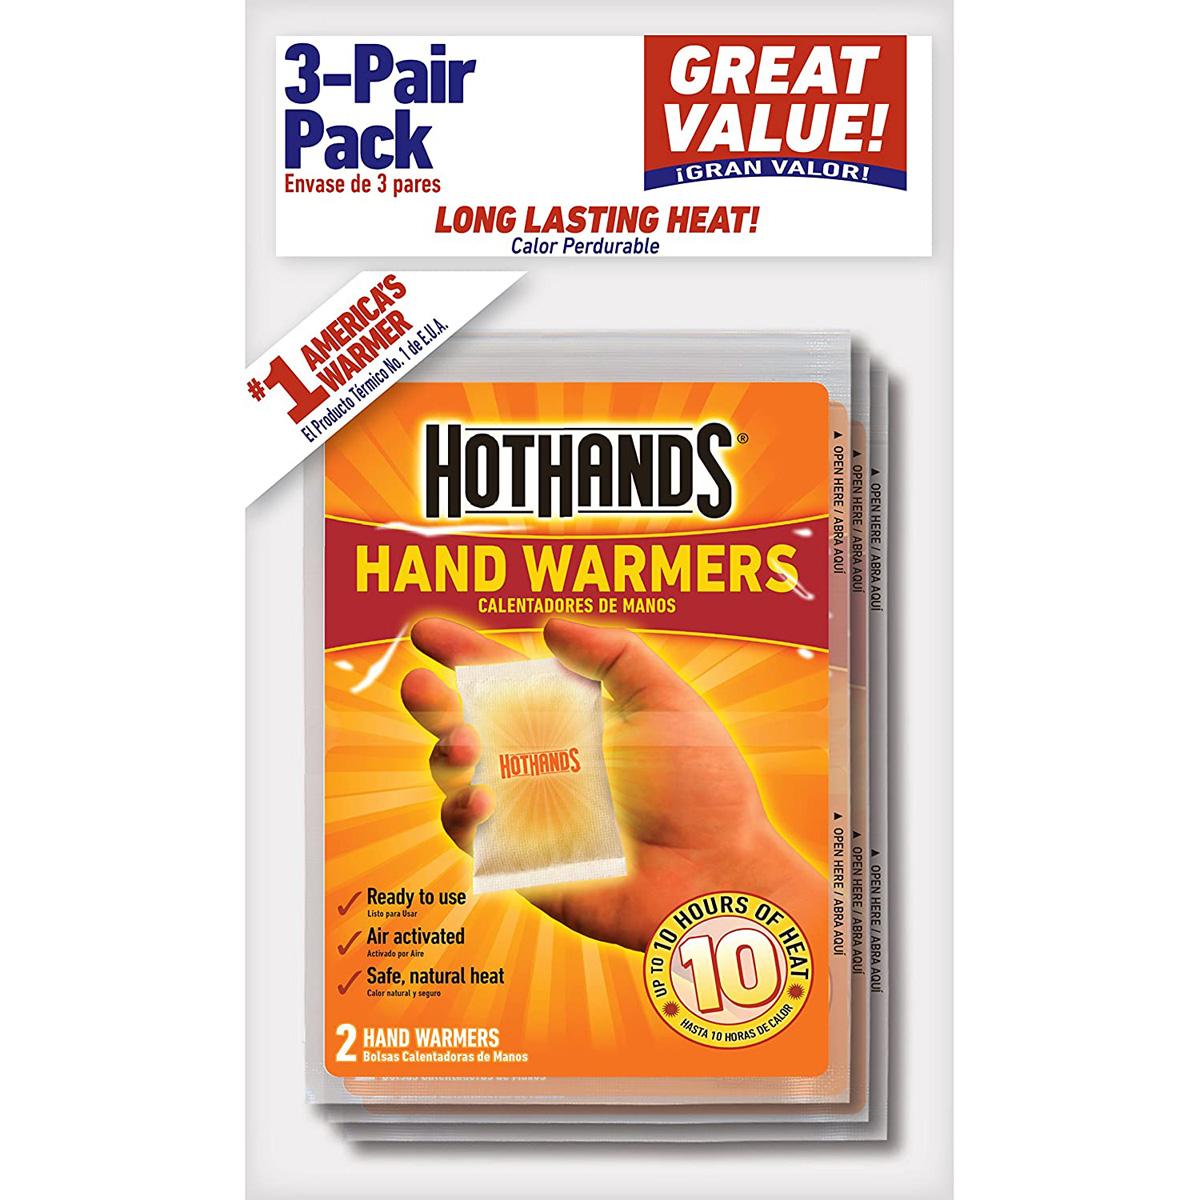 6 HotHands Air-Activated Hand Warmers for $1.99